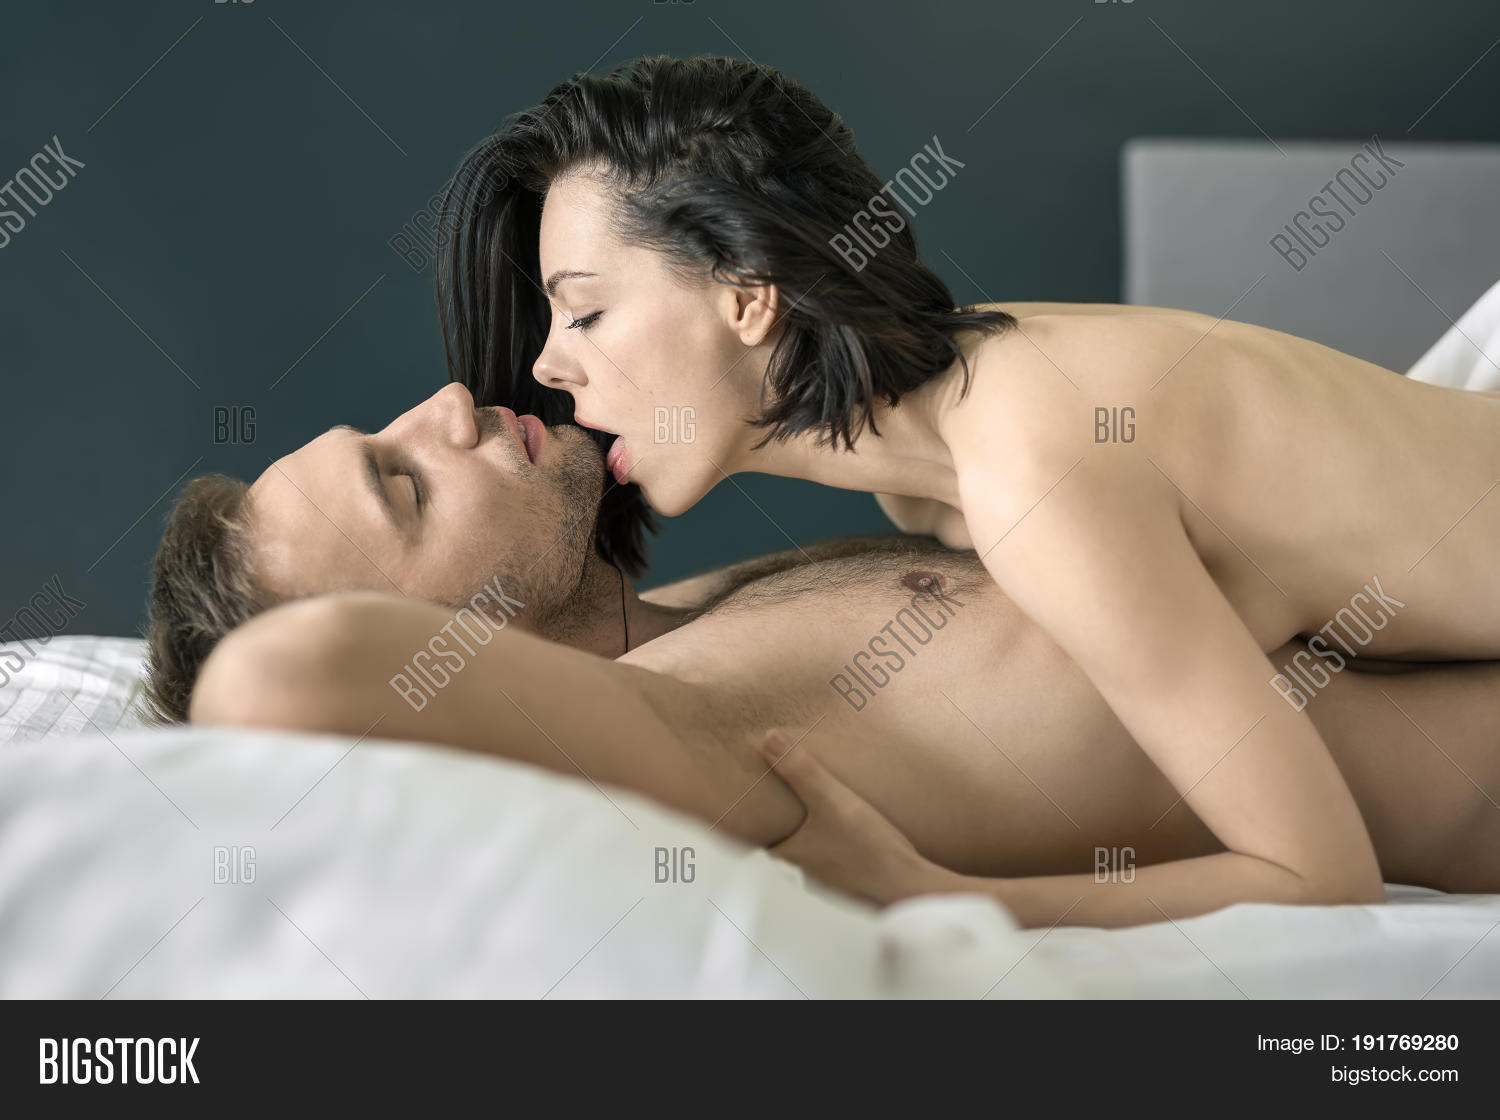 Hot Nude Couple Closed Image & Photo (Free Trial) | Bigstock